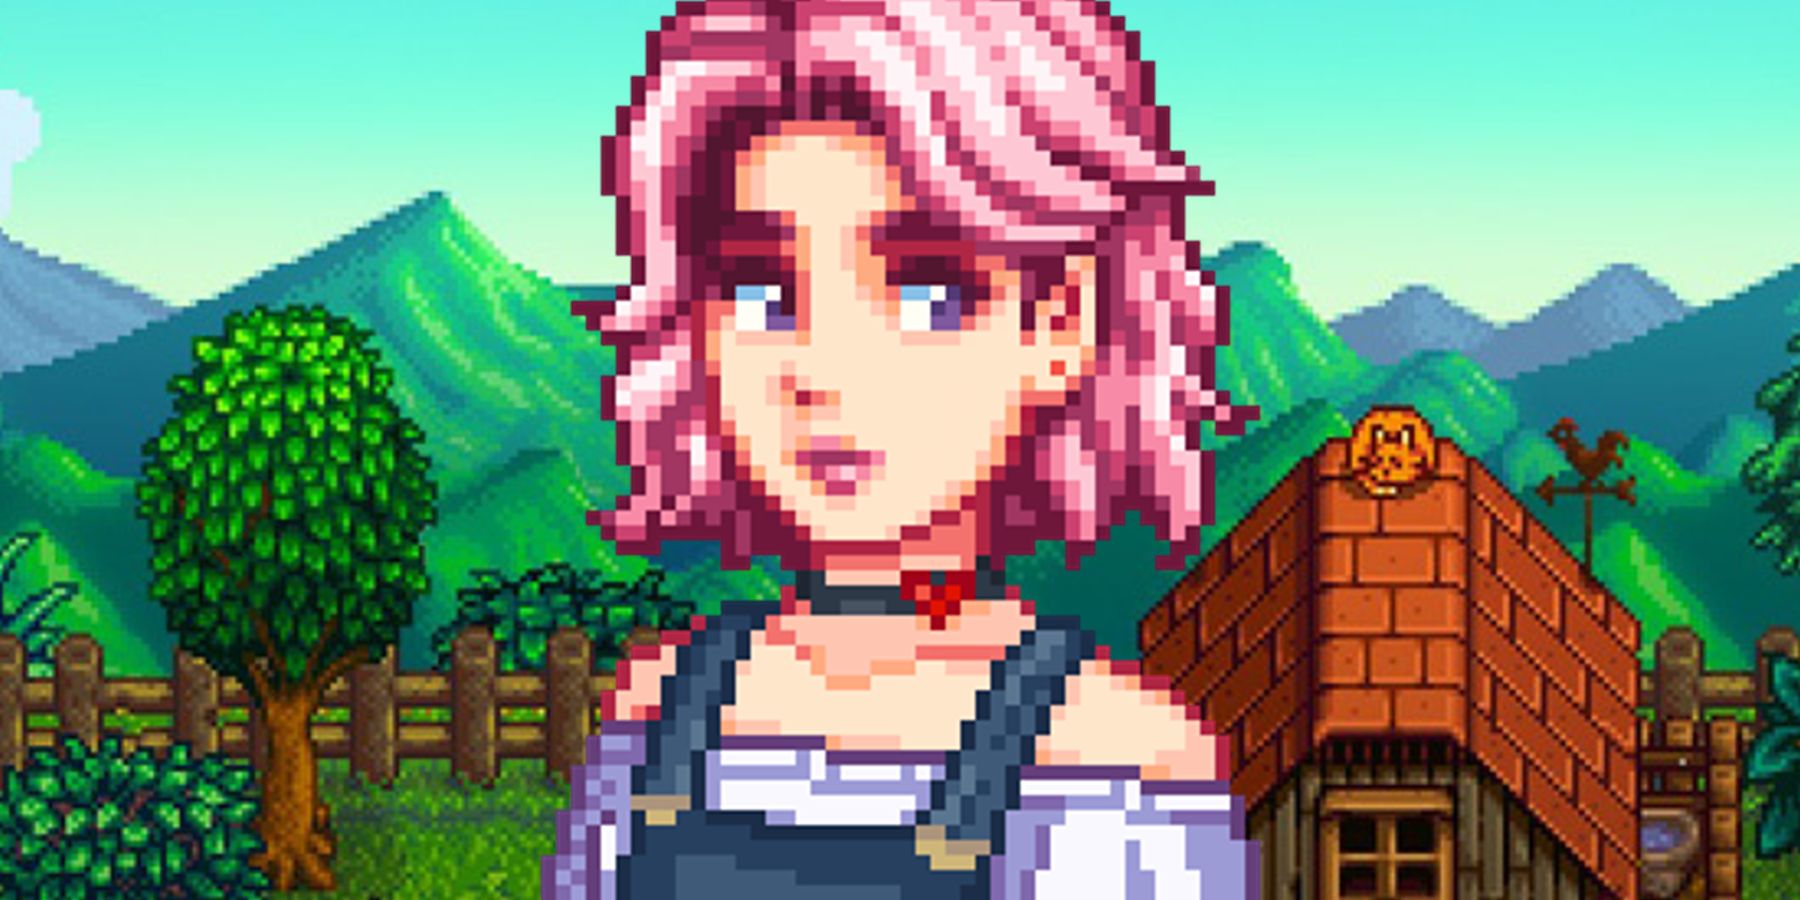 What to Expect from Stardew Valley Update 1.6